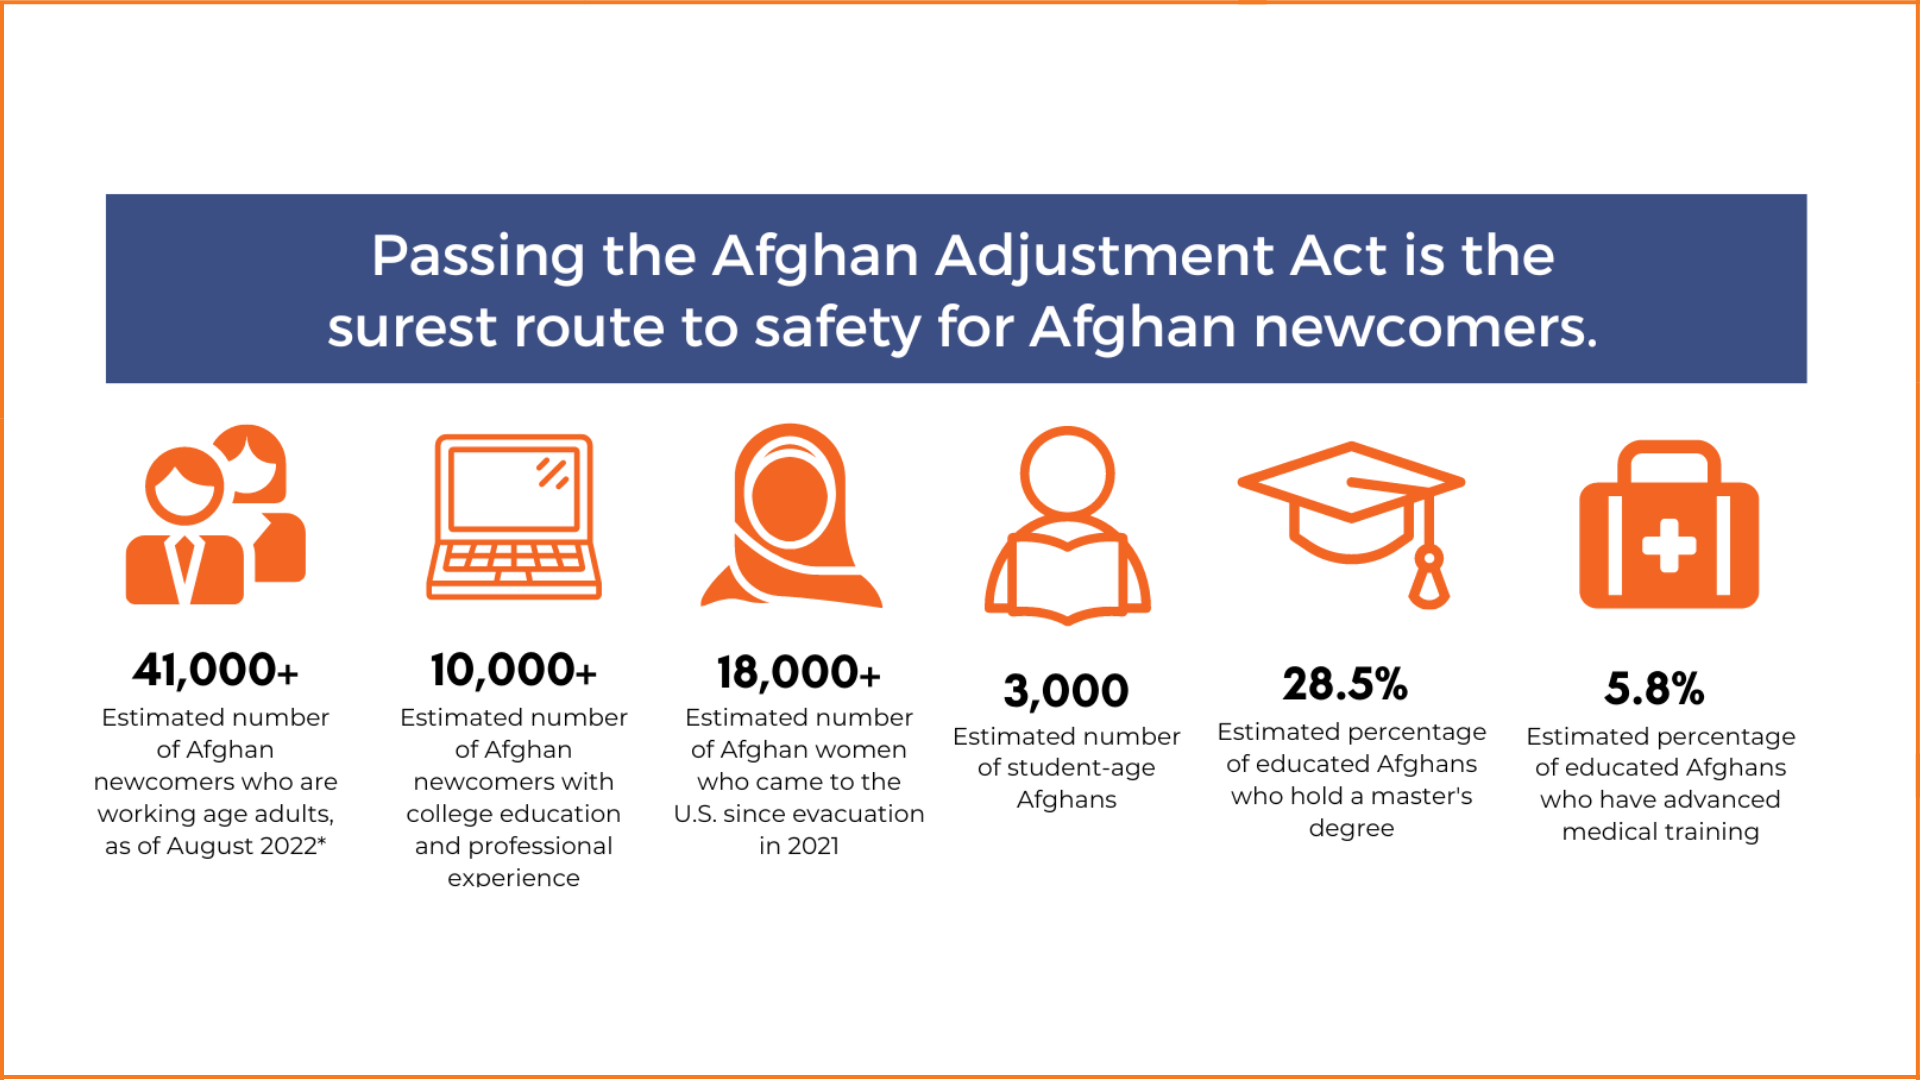 New Report: Failure to Secure Immigration Status of 36,000 Afghan Refugees Could Cost the U.S. Economy More Than 1.7B in Potential Earnings